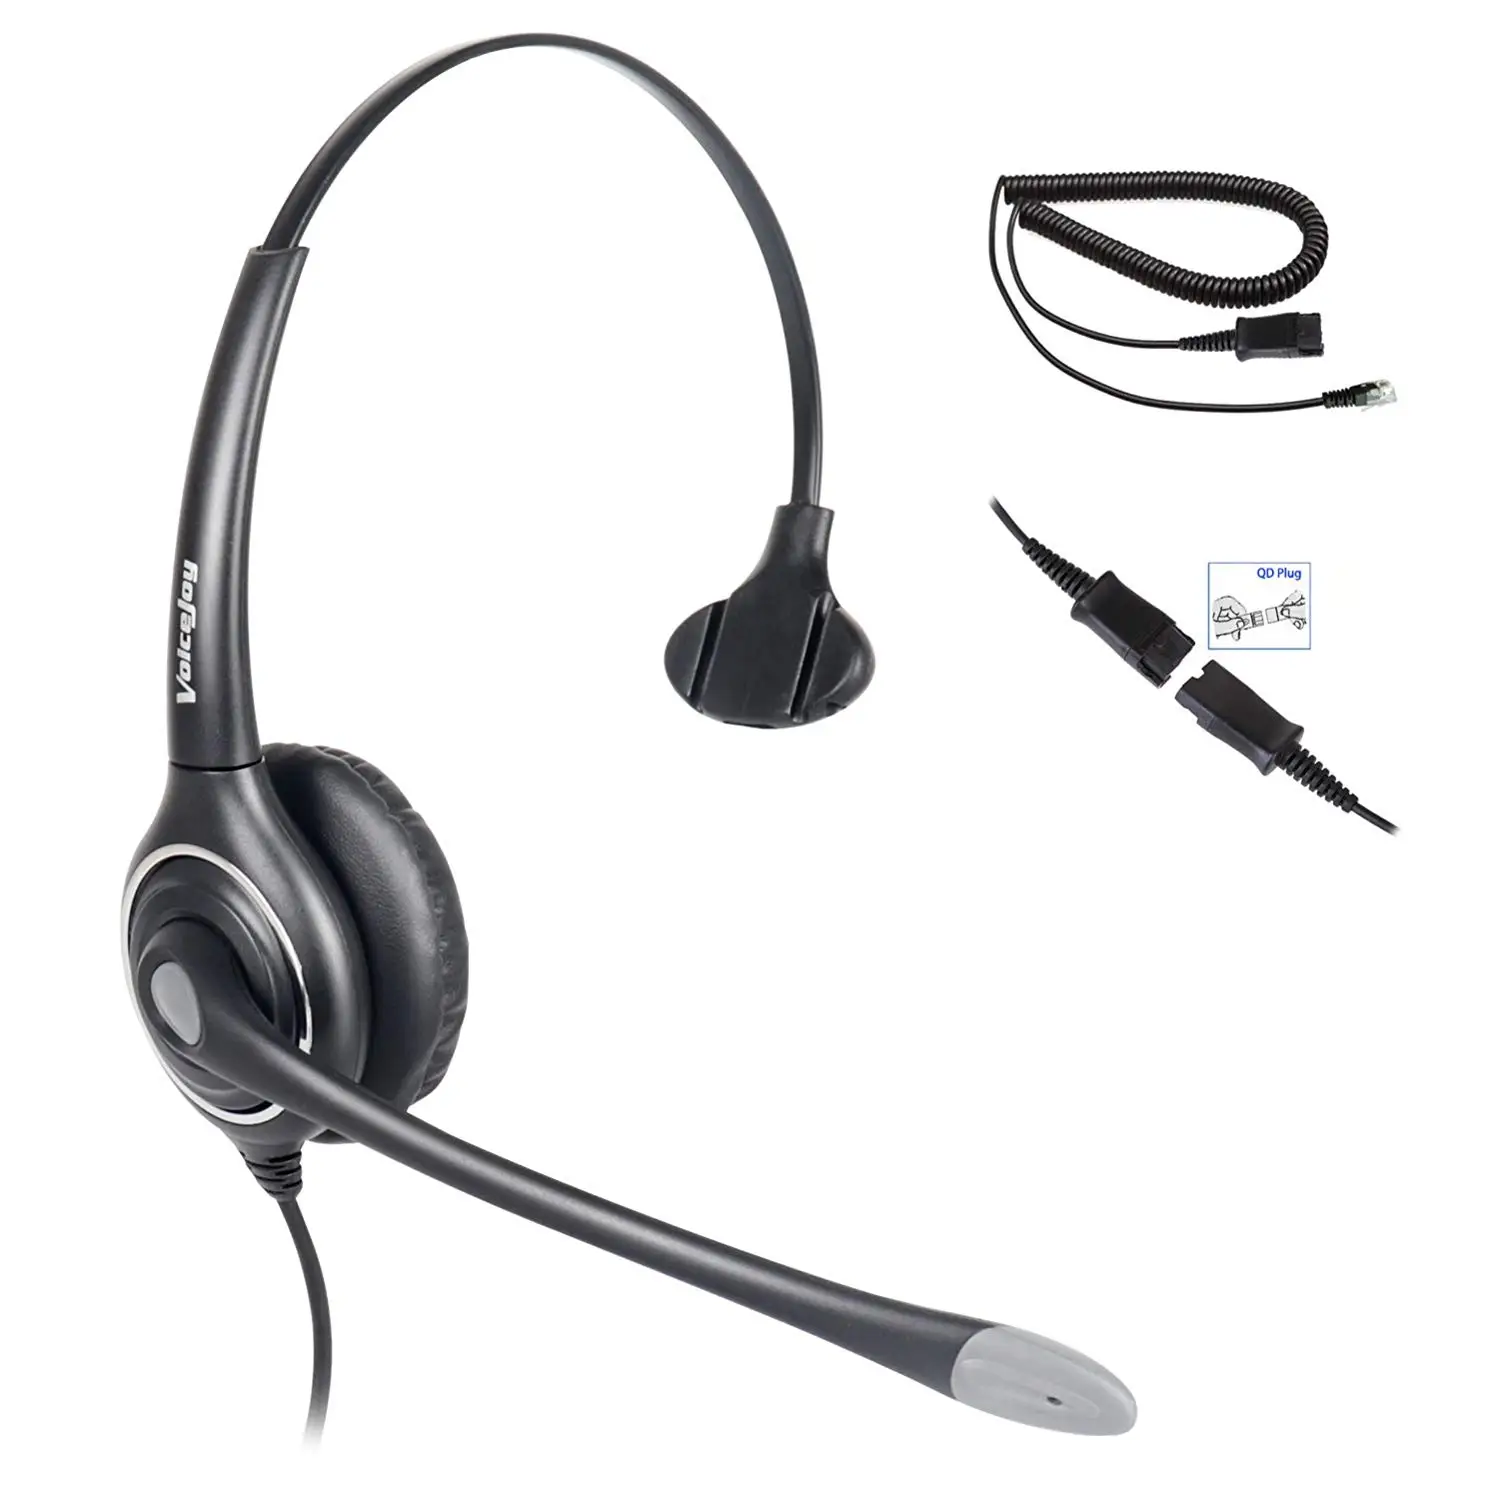 New Call Center Monaural headset microphone headsets  Intertel 8520 8560 8600 